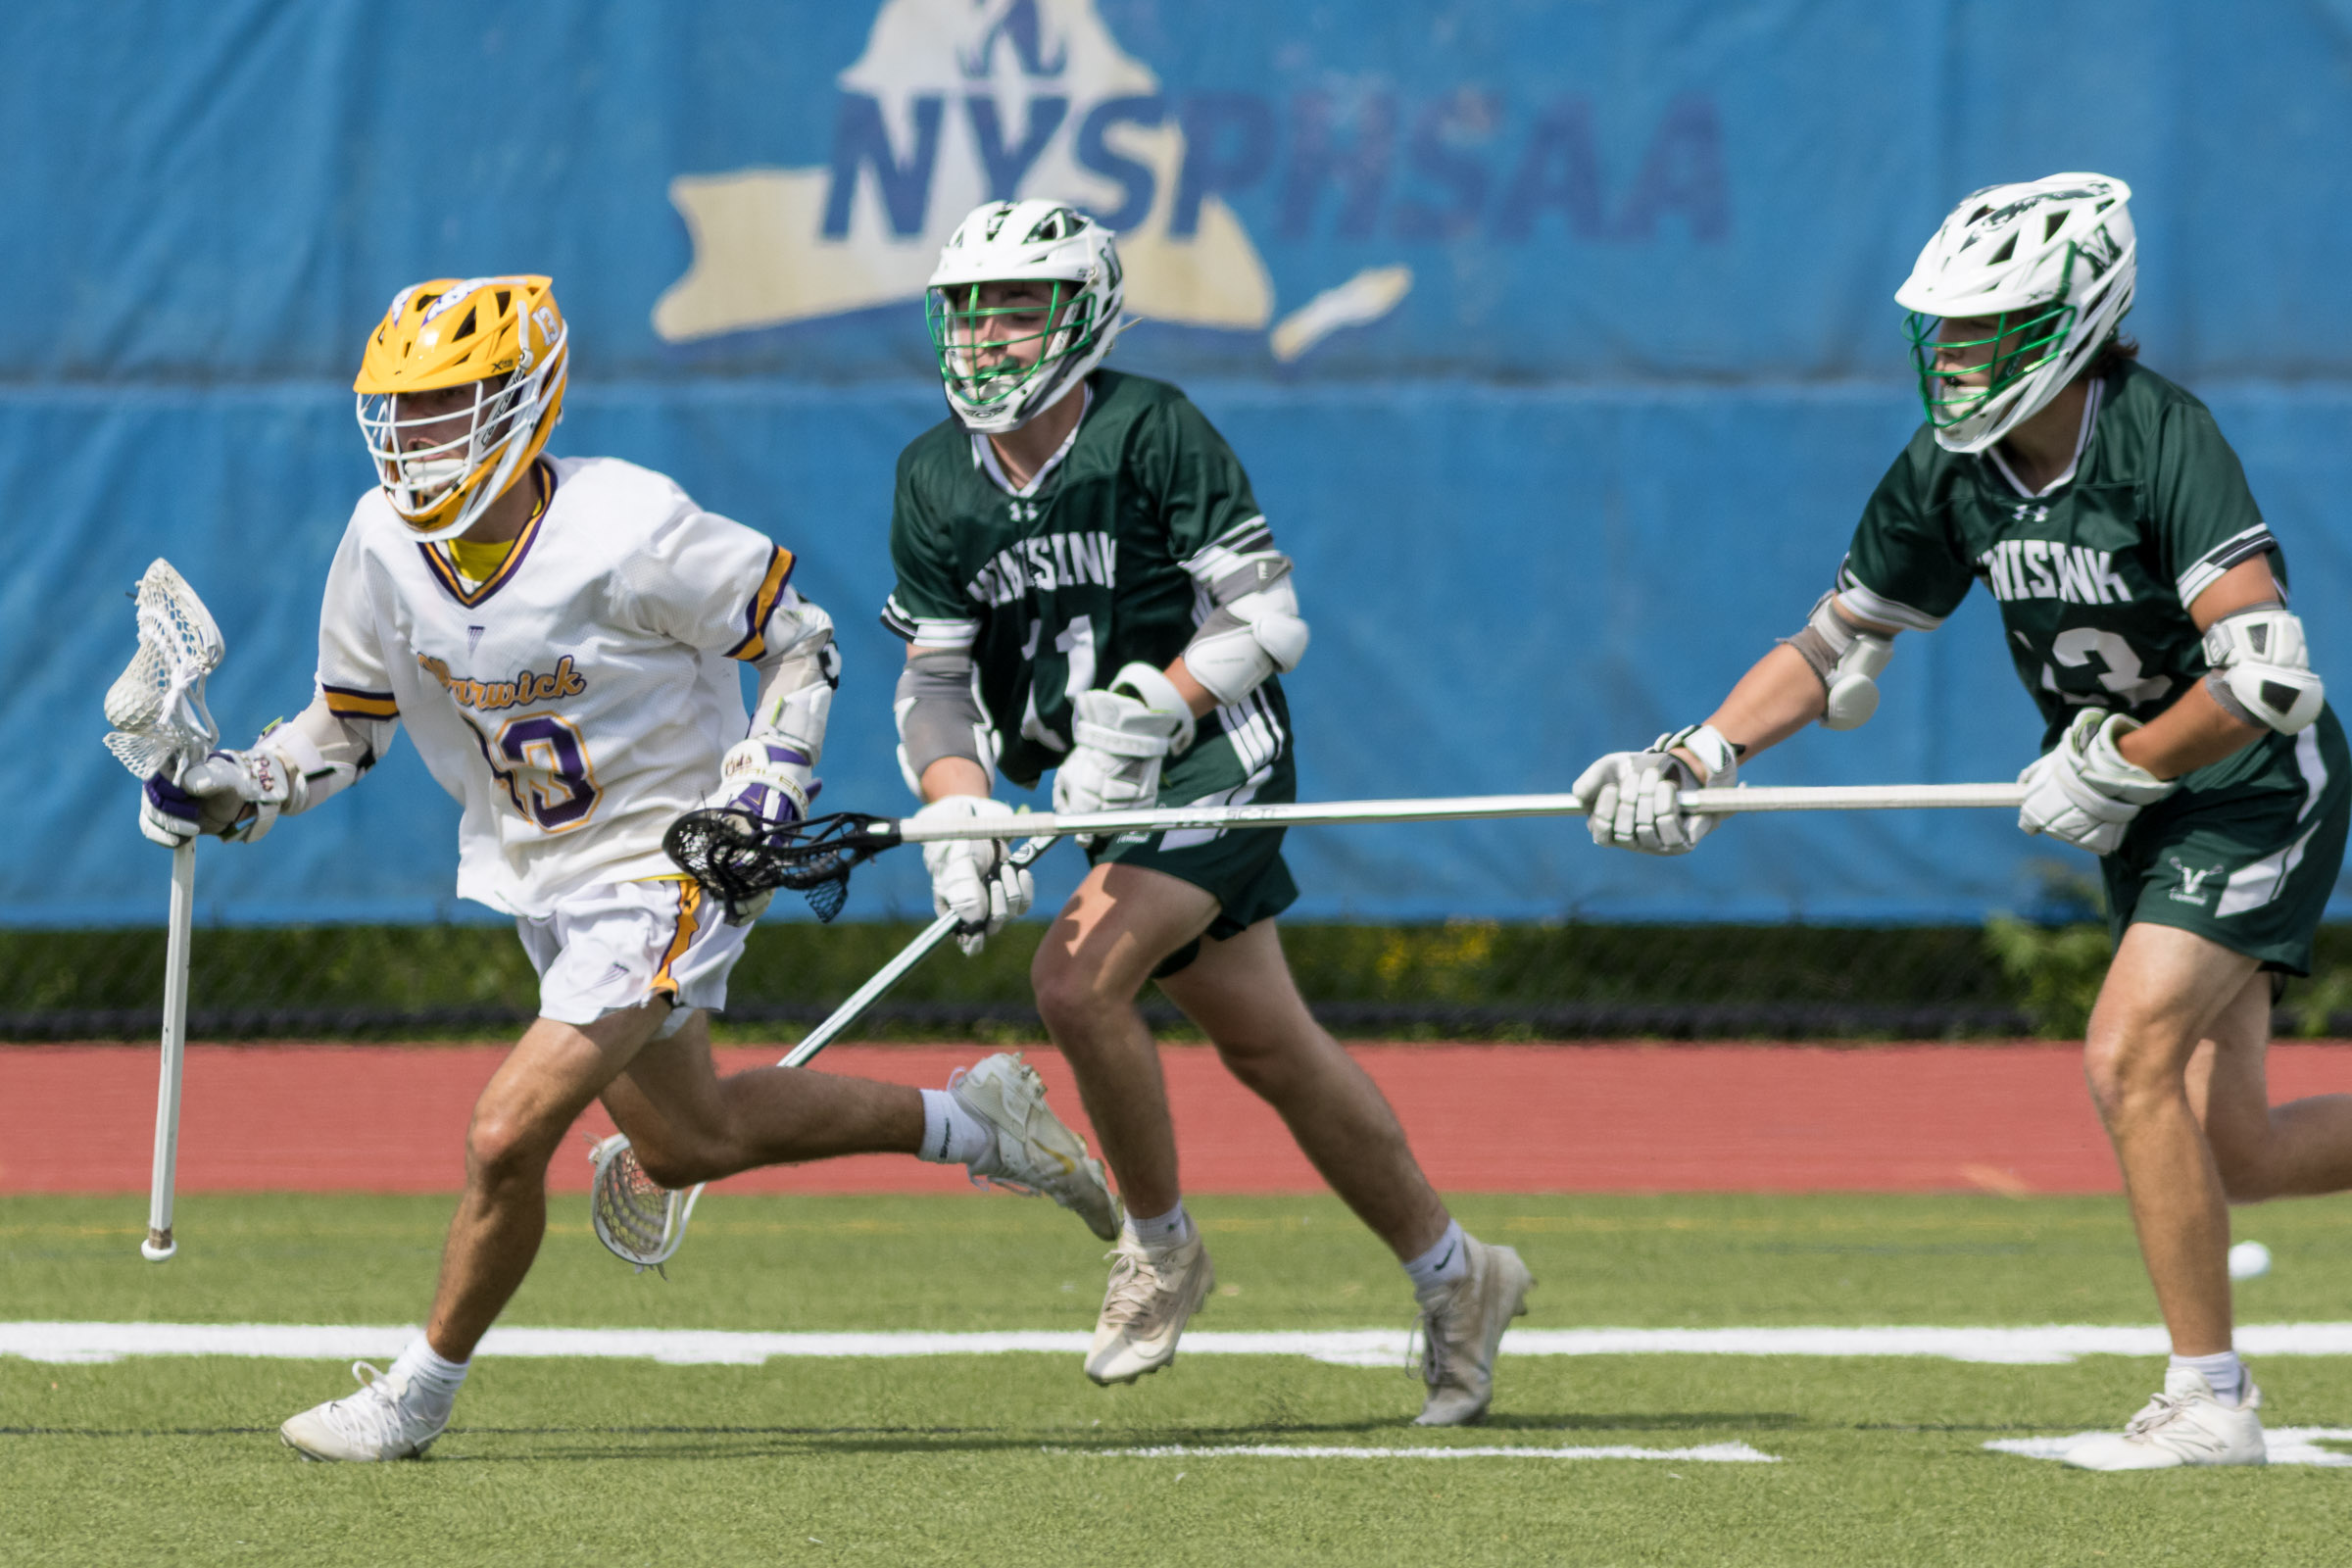 A Warwick Valley varsity boys lacrosse player carries the ball past two Minisink Valley players during the Section 9 Class B championship game.